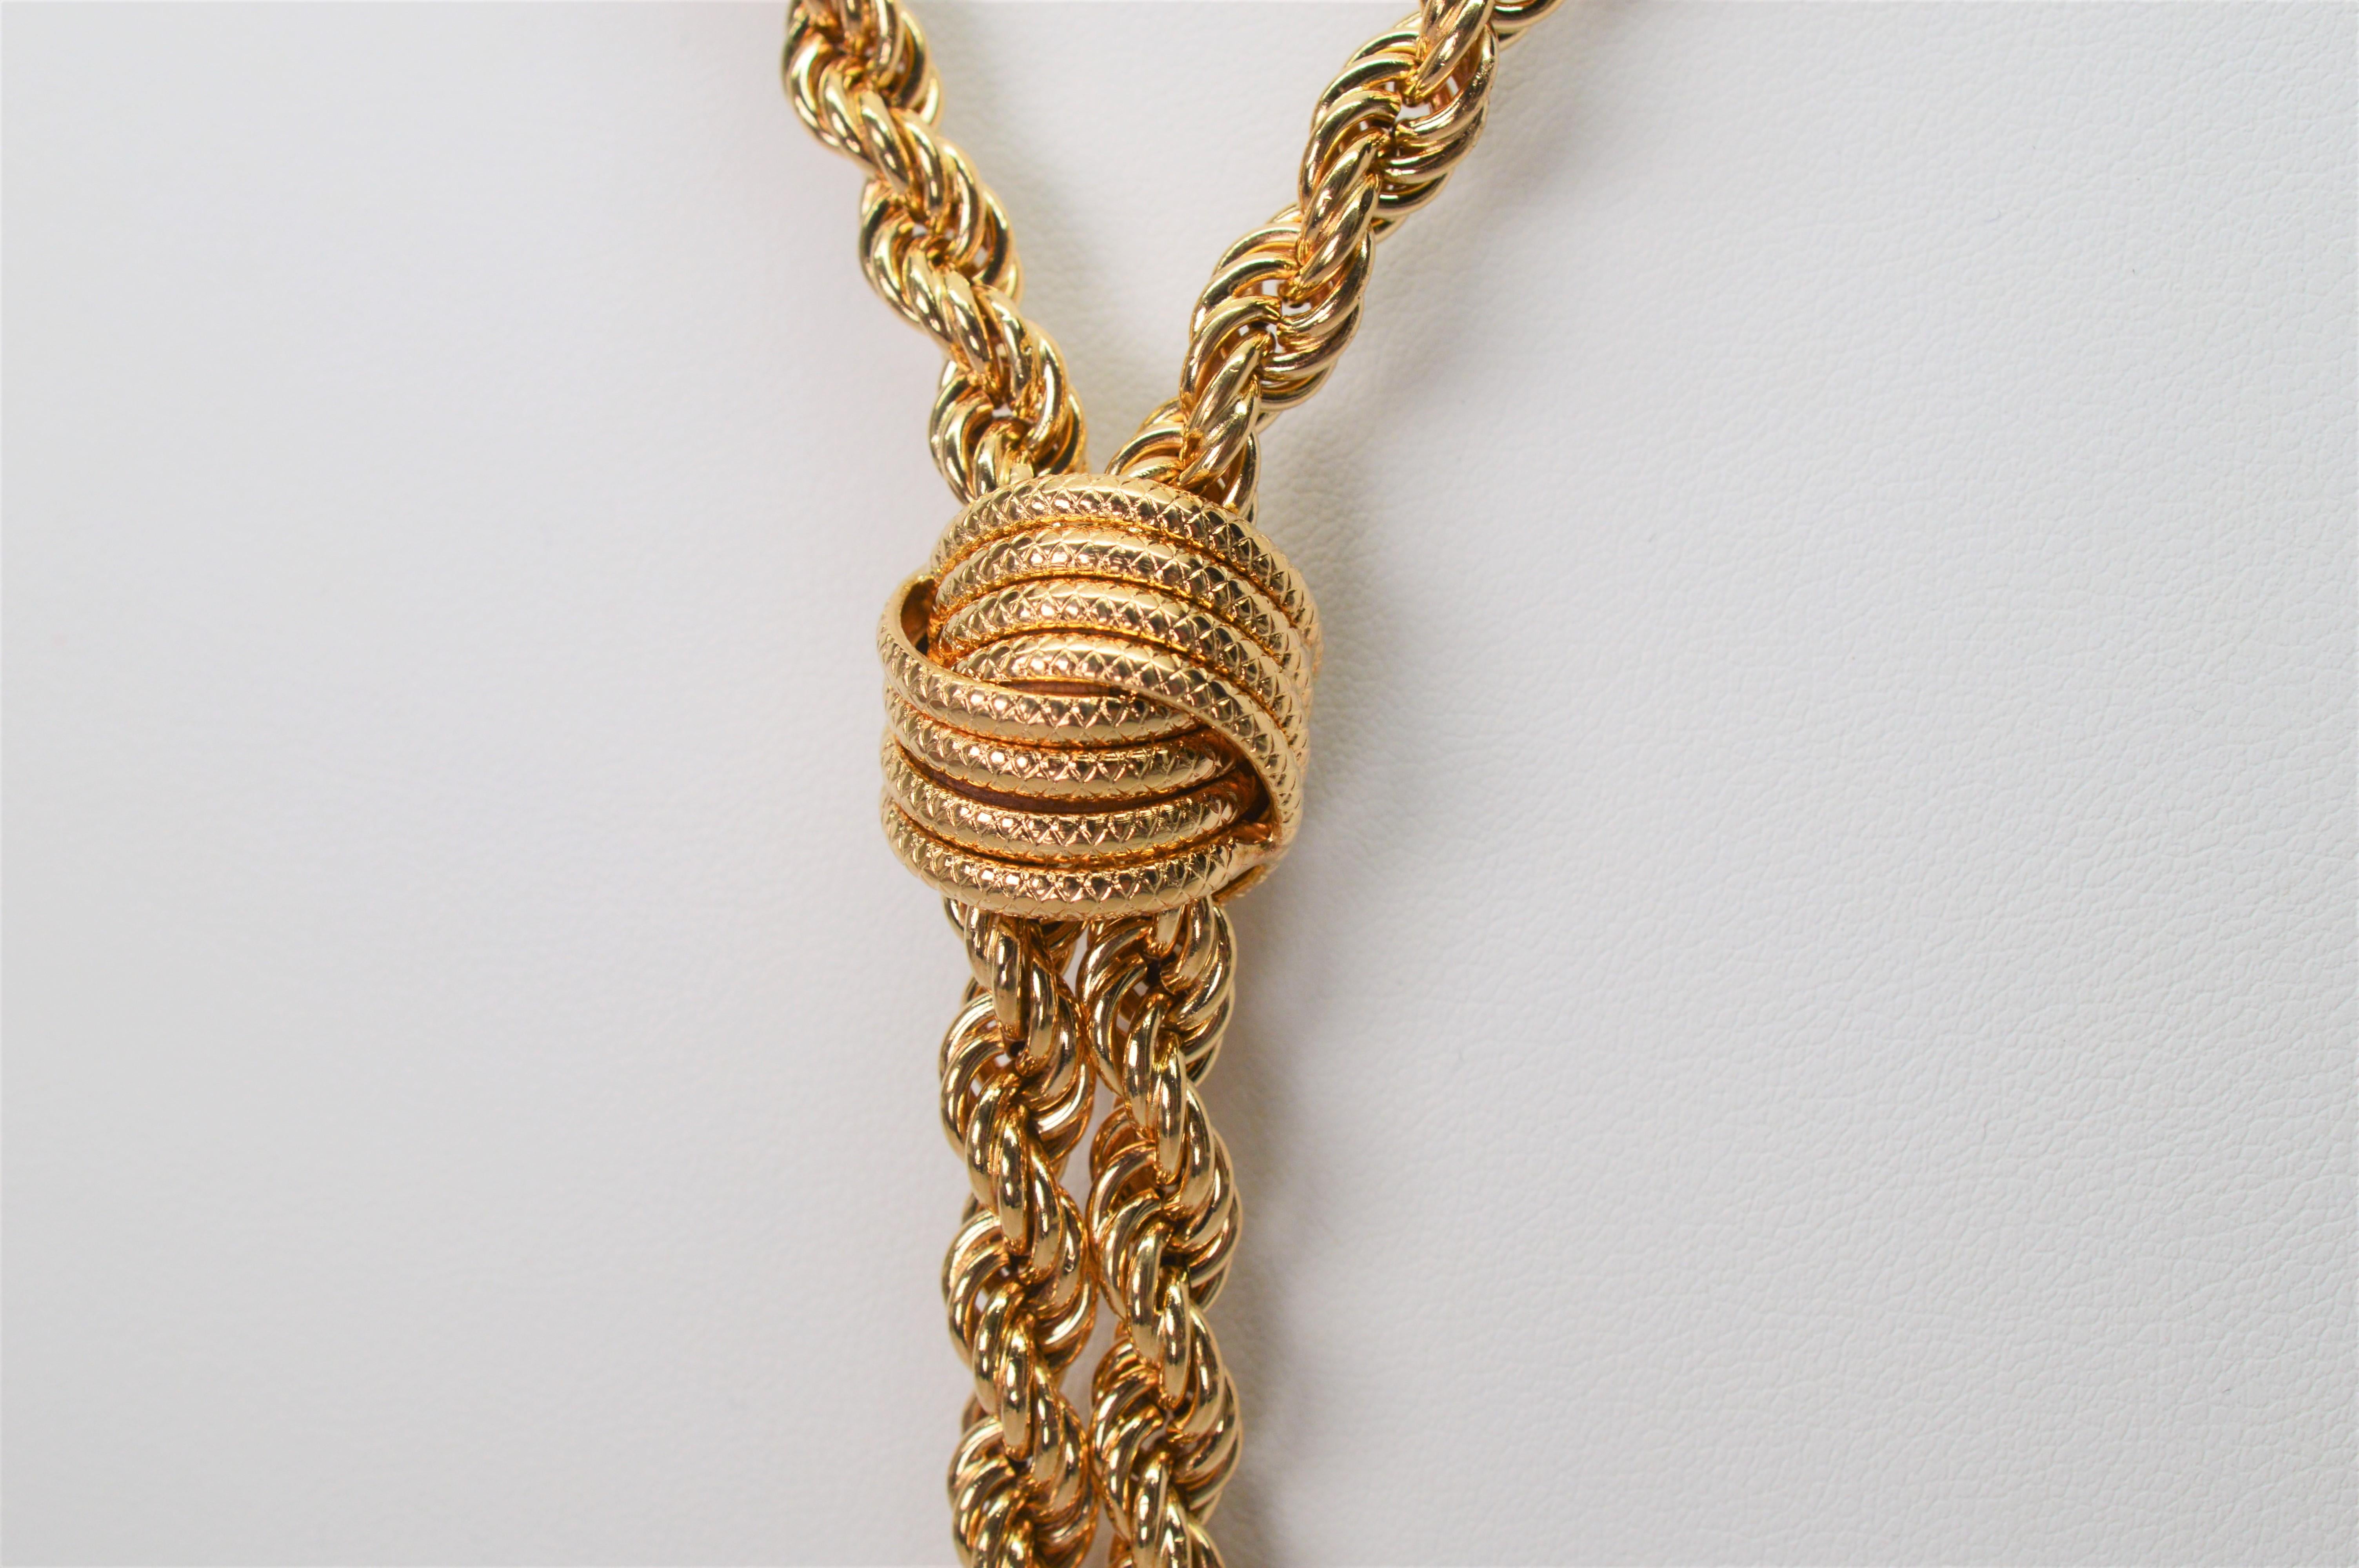 14 Karat Yellow Gold Rope Chain Lariat Style Necklace In Excellent Condition For Sale In Mount Kisco, NY